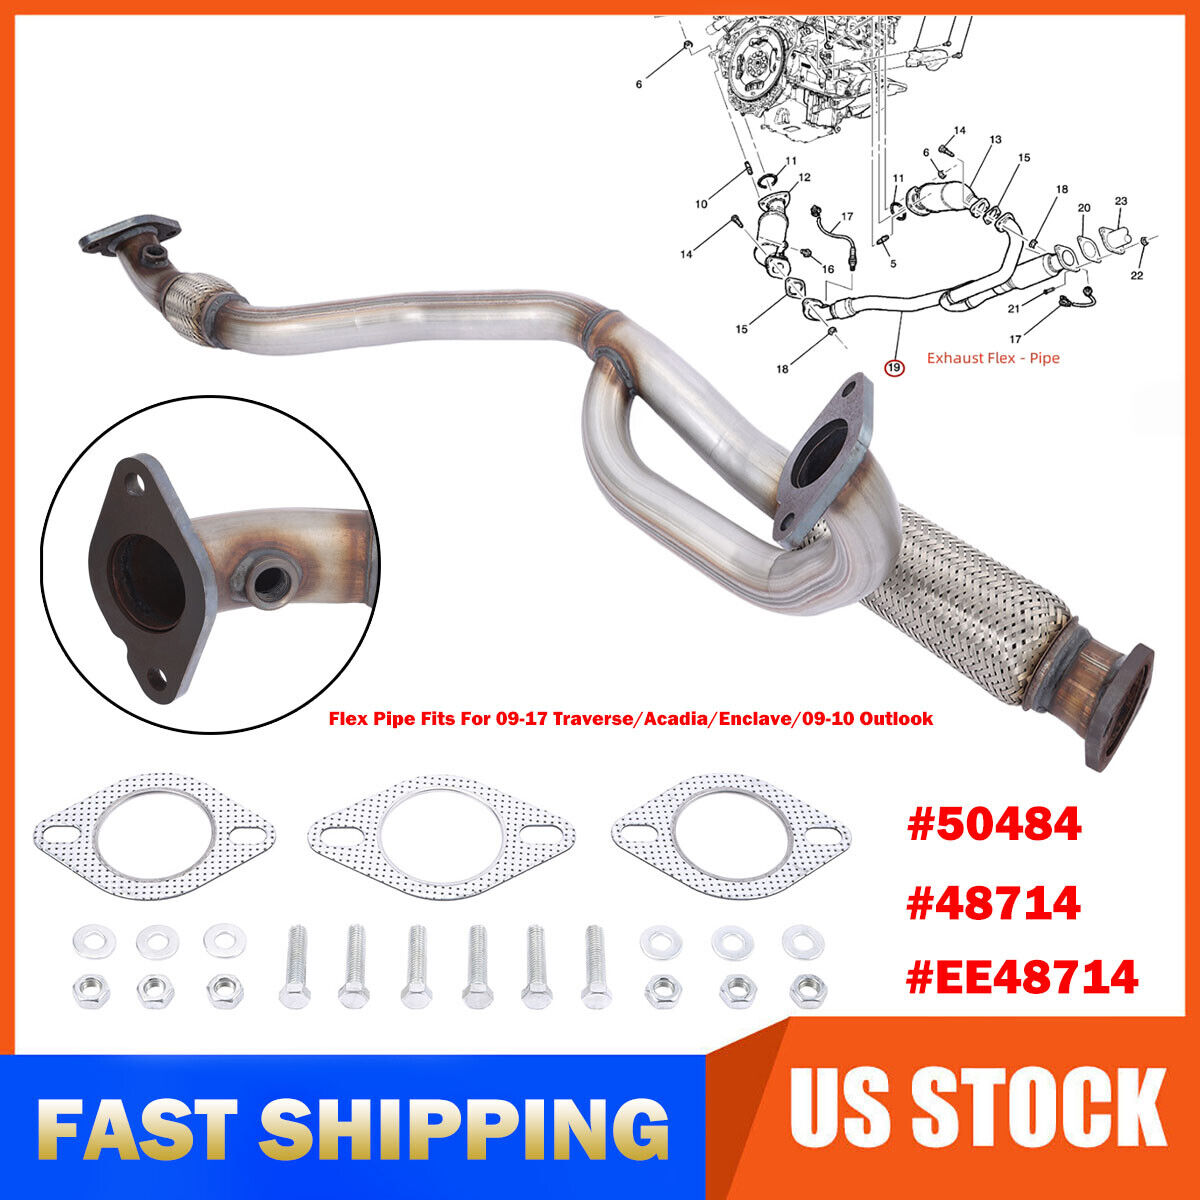 Stainless Steel Exhaust Y Flex Pipe For Enclave Traverse Acadia Outlook 2009-17